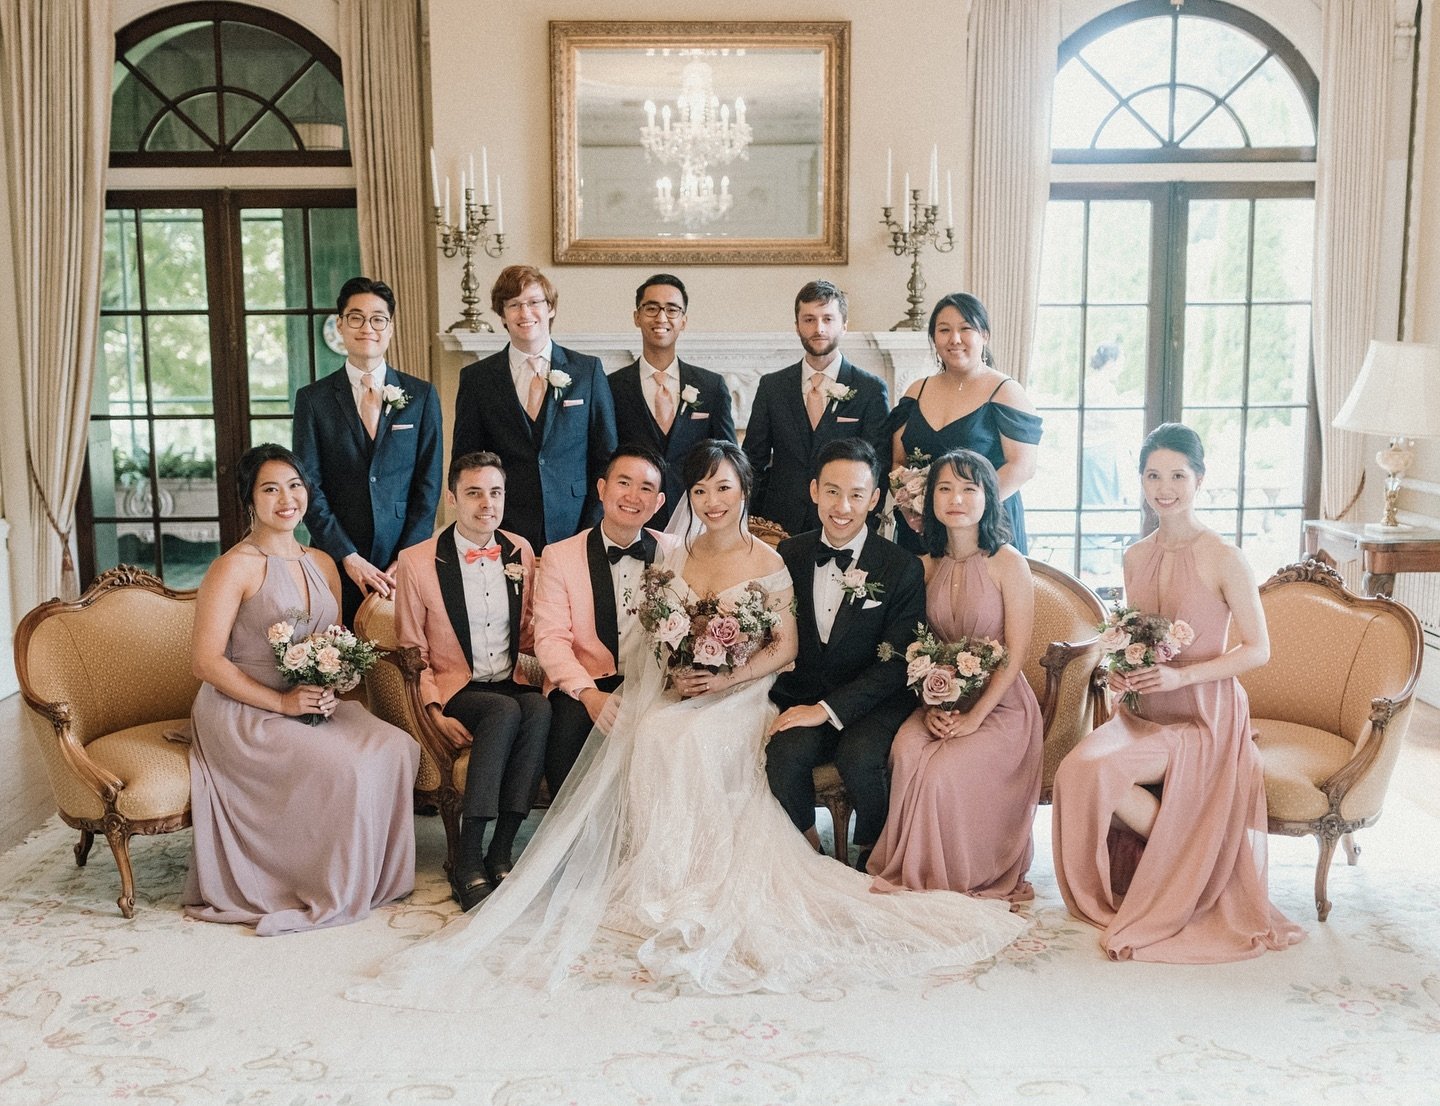 Gathered with the picture perfect wedding party at the beautiful @hycroftuwcv ❤️

Planner @eternitymomentswedding 
Photos @thekoebels 
Video @dreamsodacreative 
Makeup &amp; hair @momo_makeupartist 
Decor &amp; floral @infinityeventdesign @peoniesfin